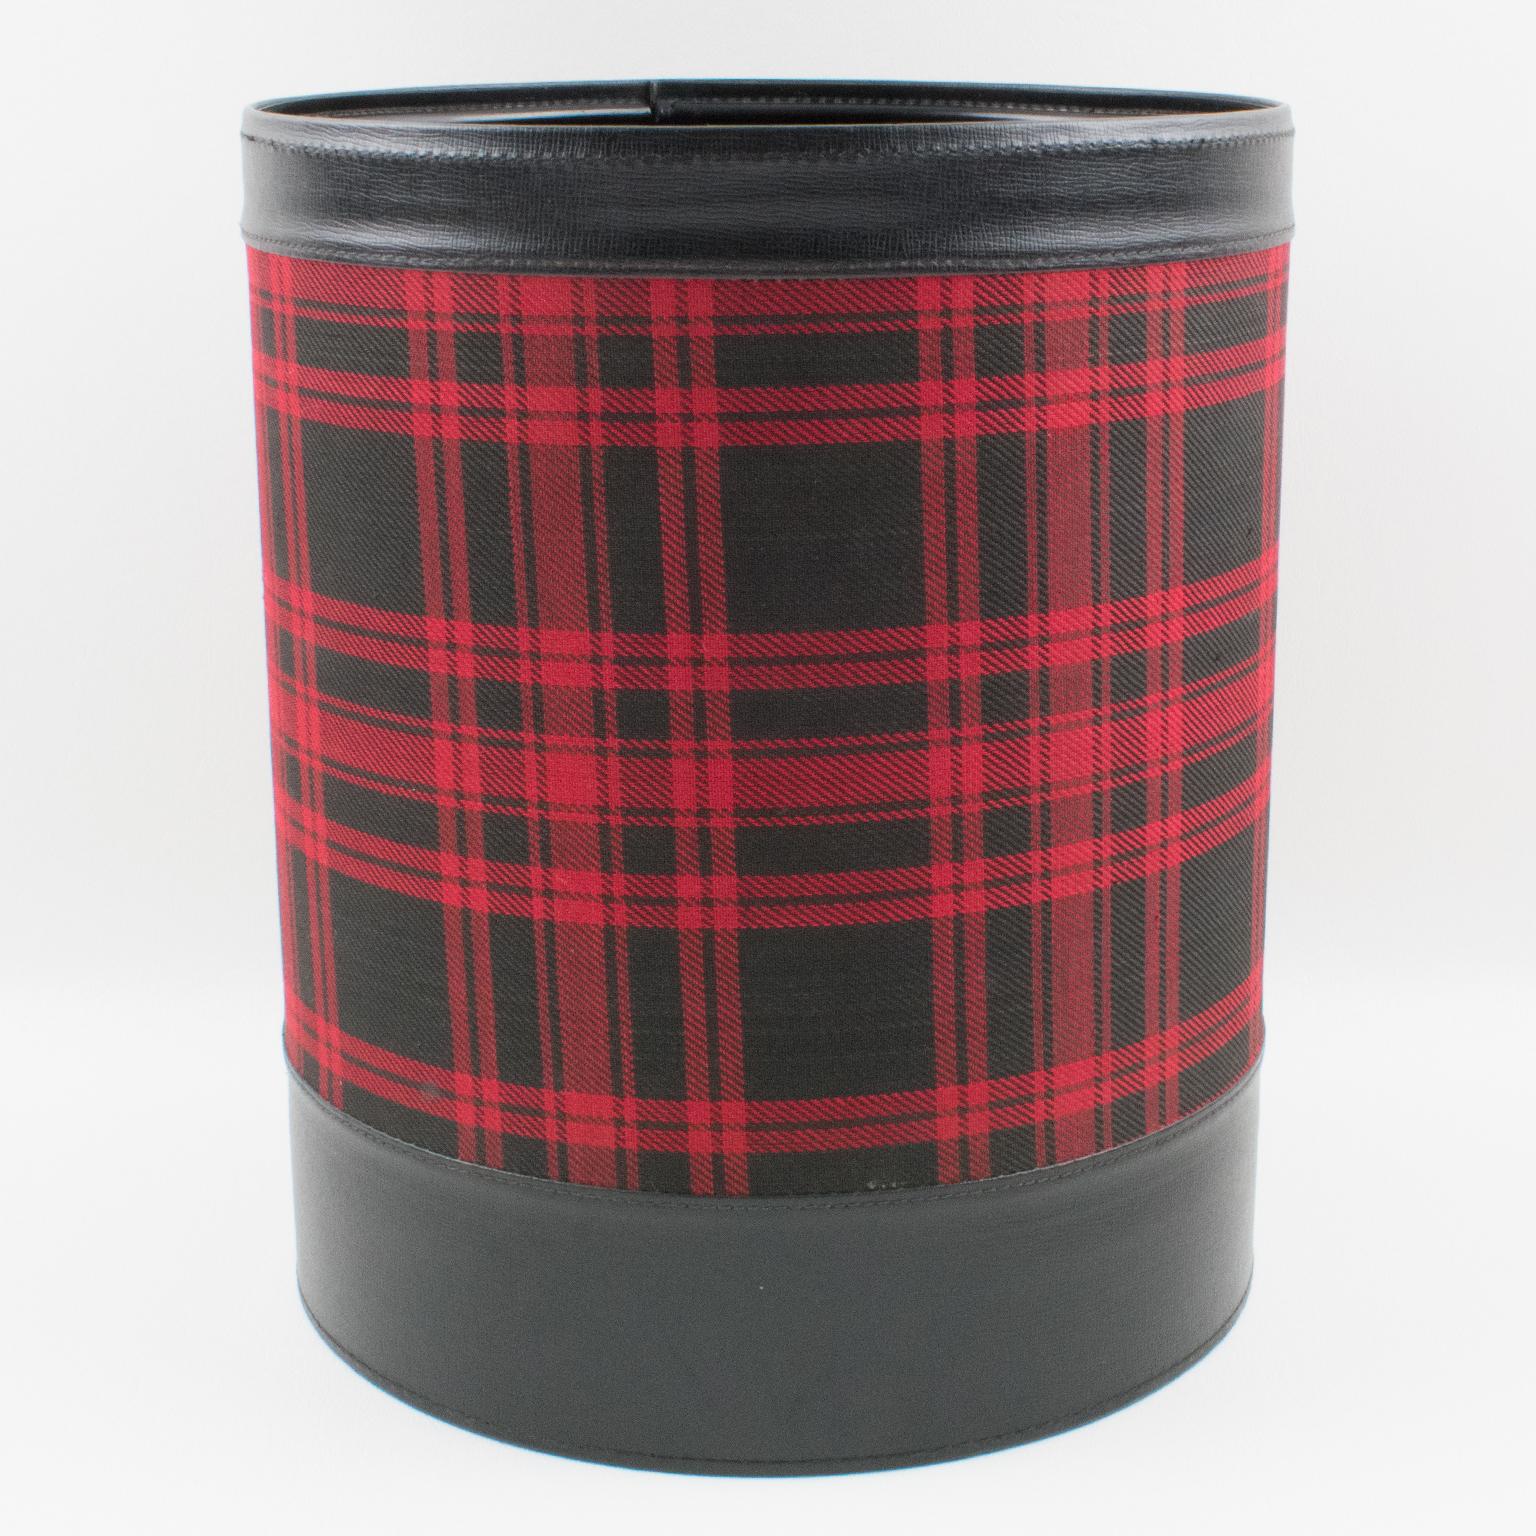 A functional 1950s modernist desk accessory, office waste-basket by French Designer Jacques Adnet, (1900-1984). Streamline shape with black hand-stitched leather and black and red fabric plaid (Scottish tartan). A very nice addition to your next